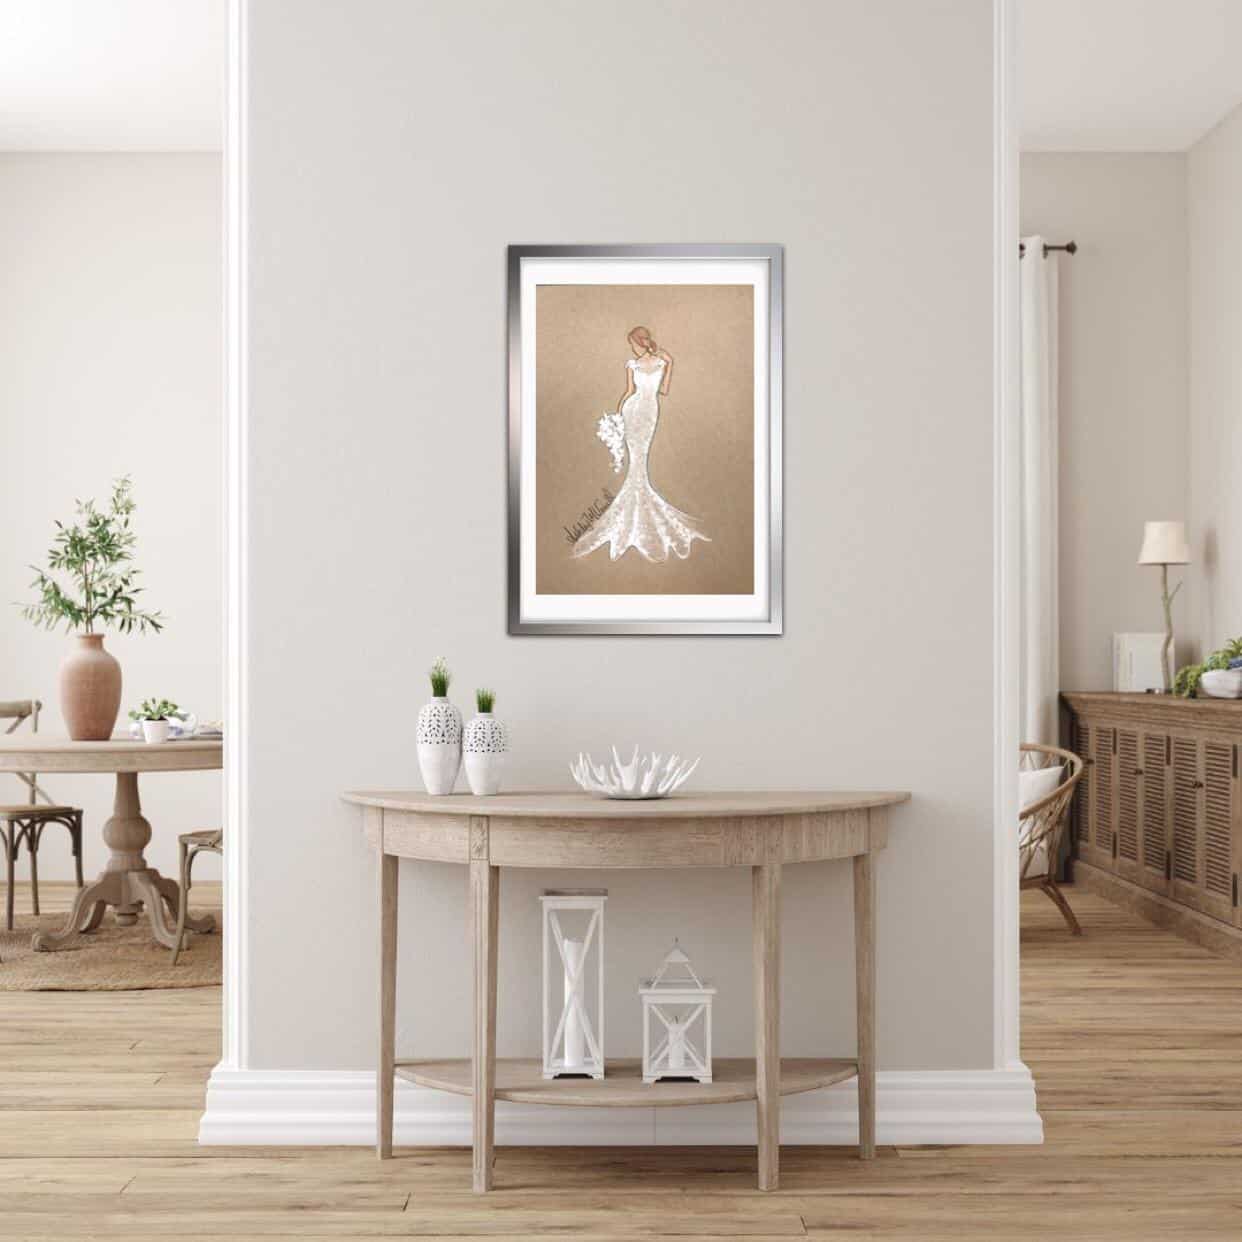 Personalized Bridal Art Hanging in Room